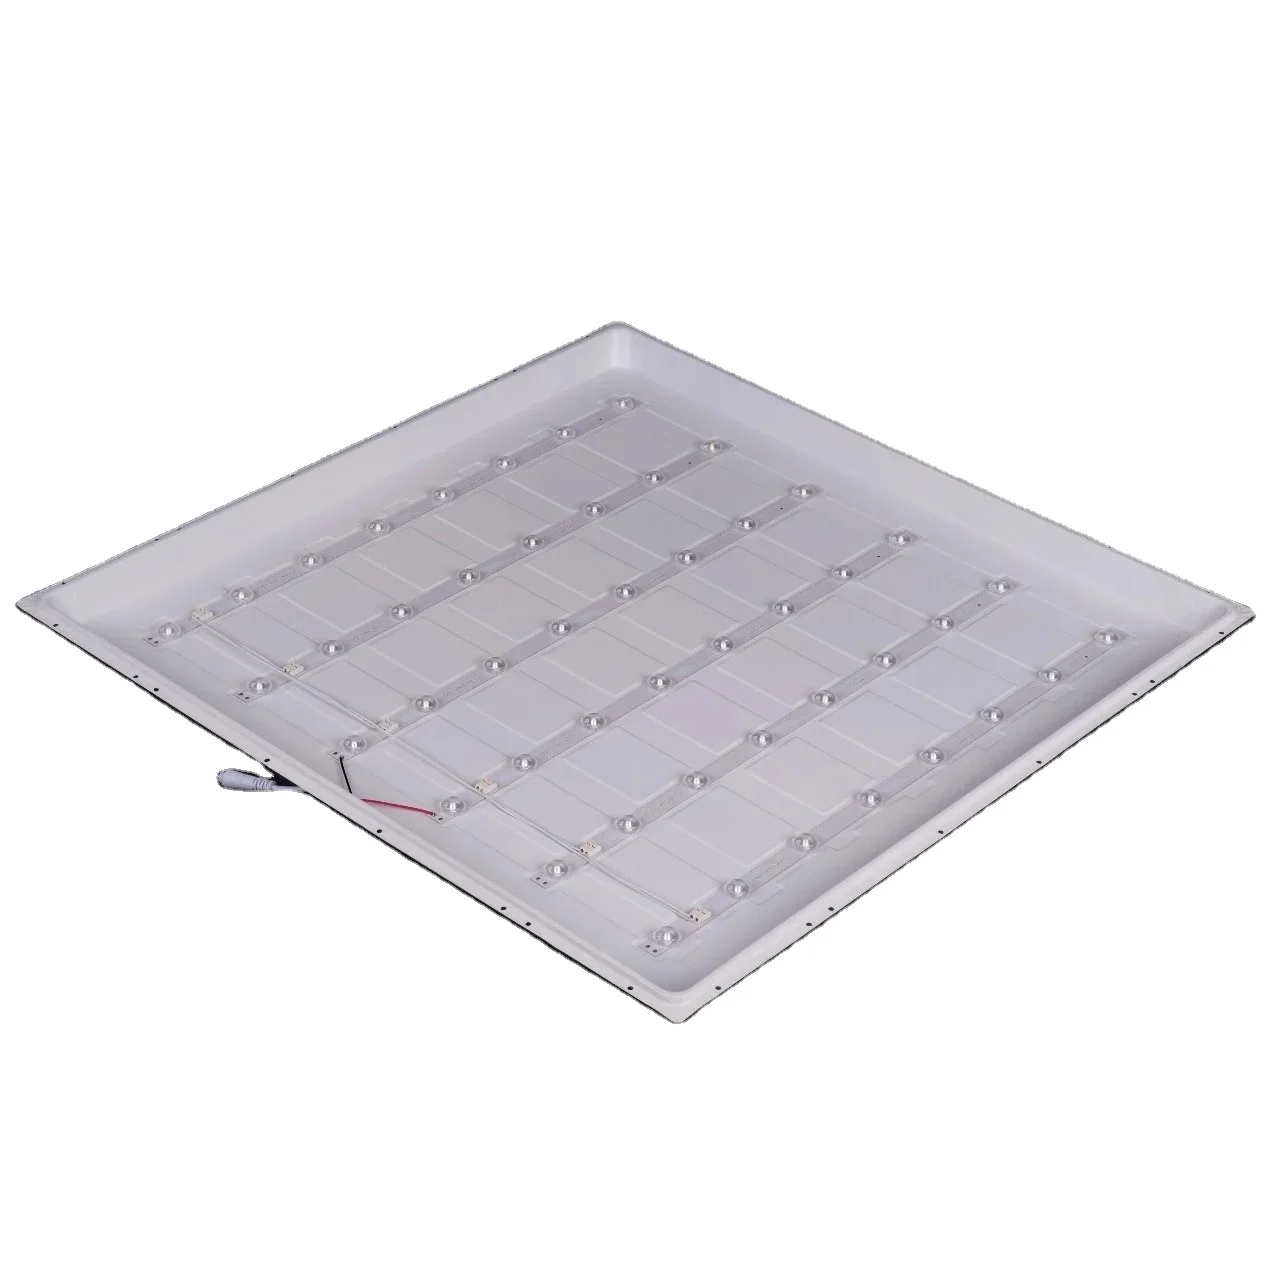 High lumi office saa super driver square backlight ceiling rgb recessed 60x60 led panel light